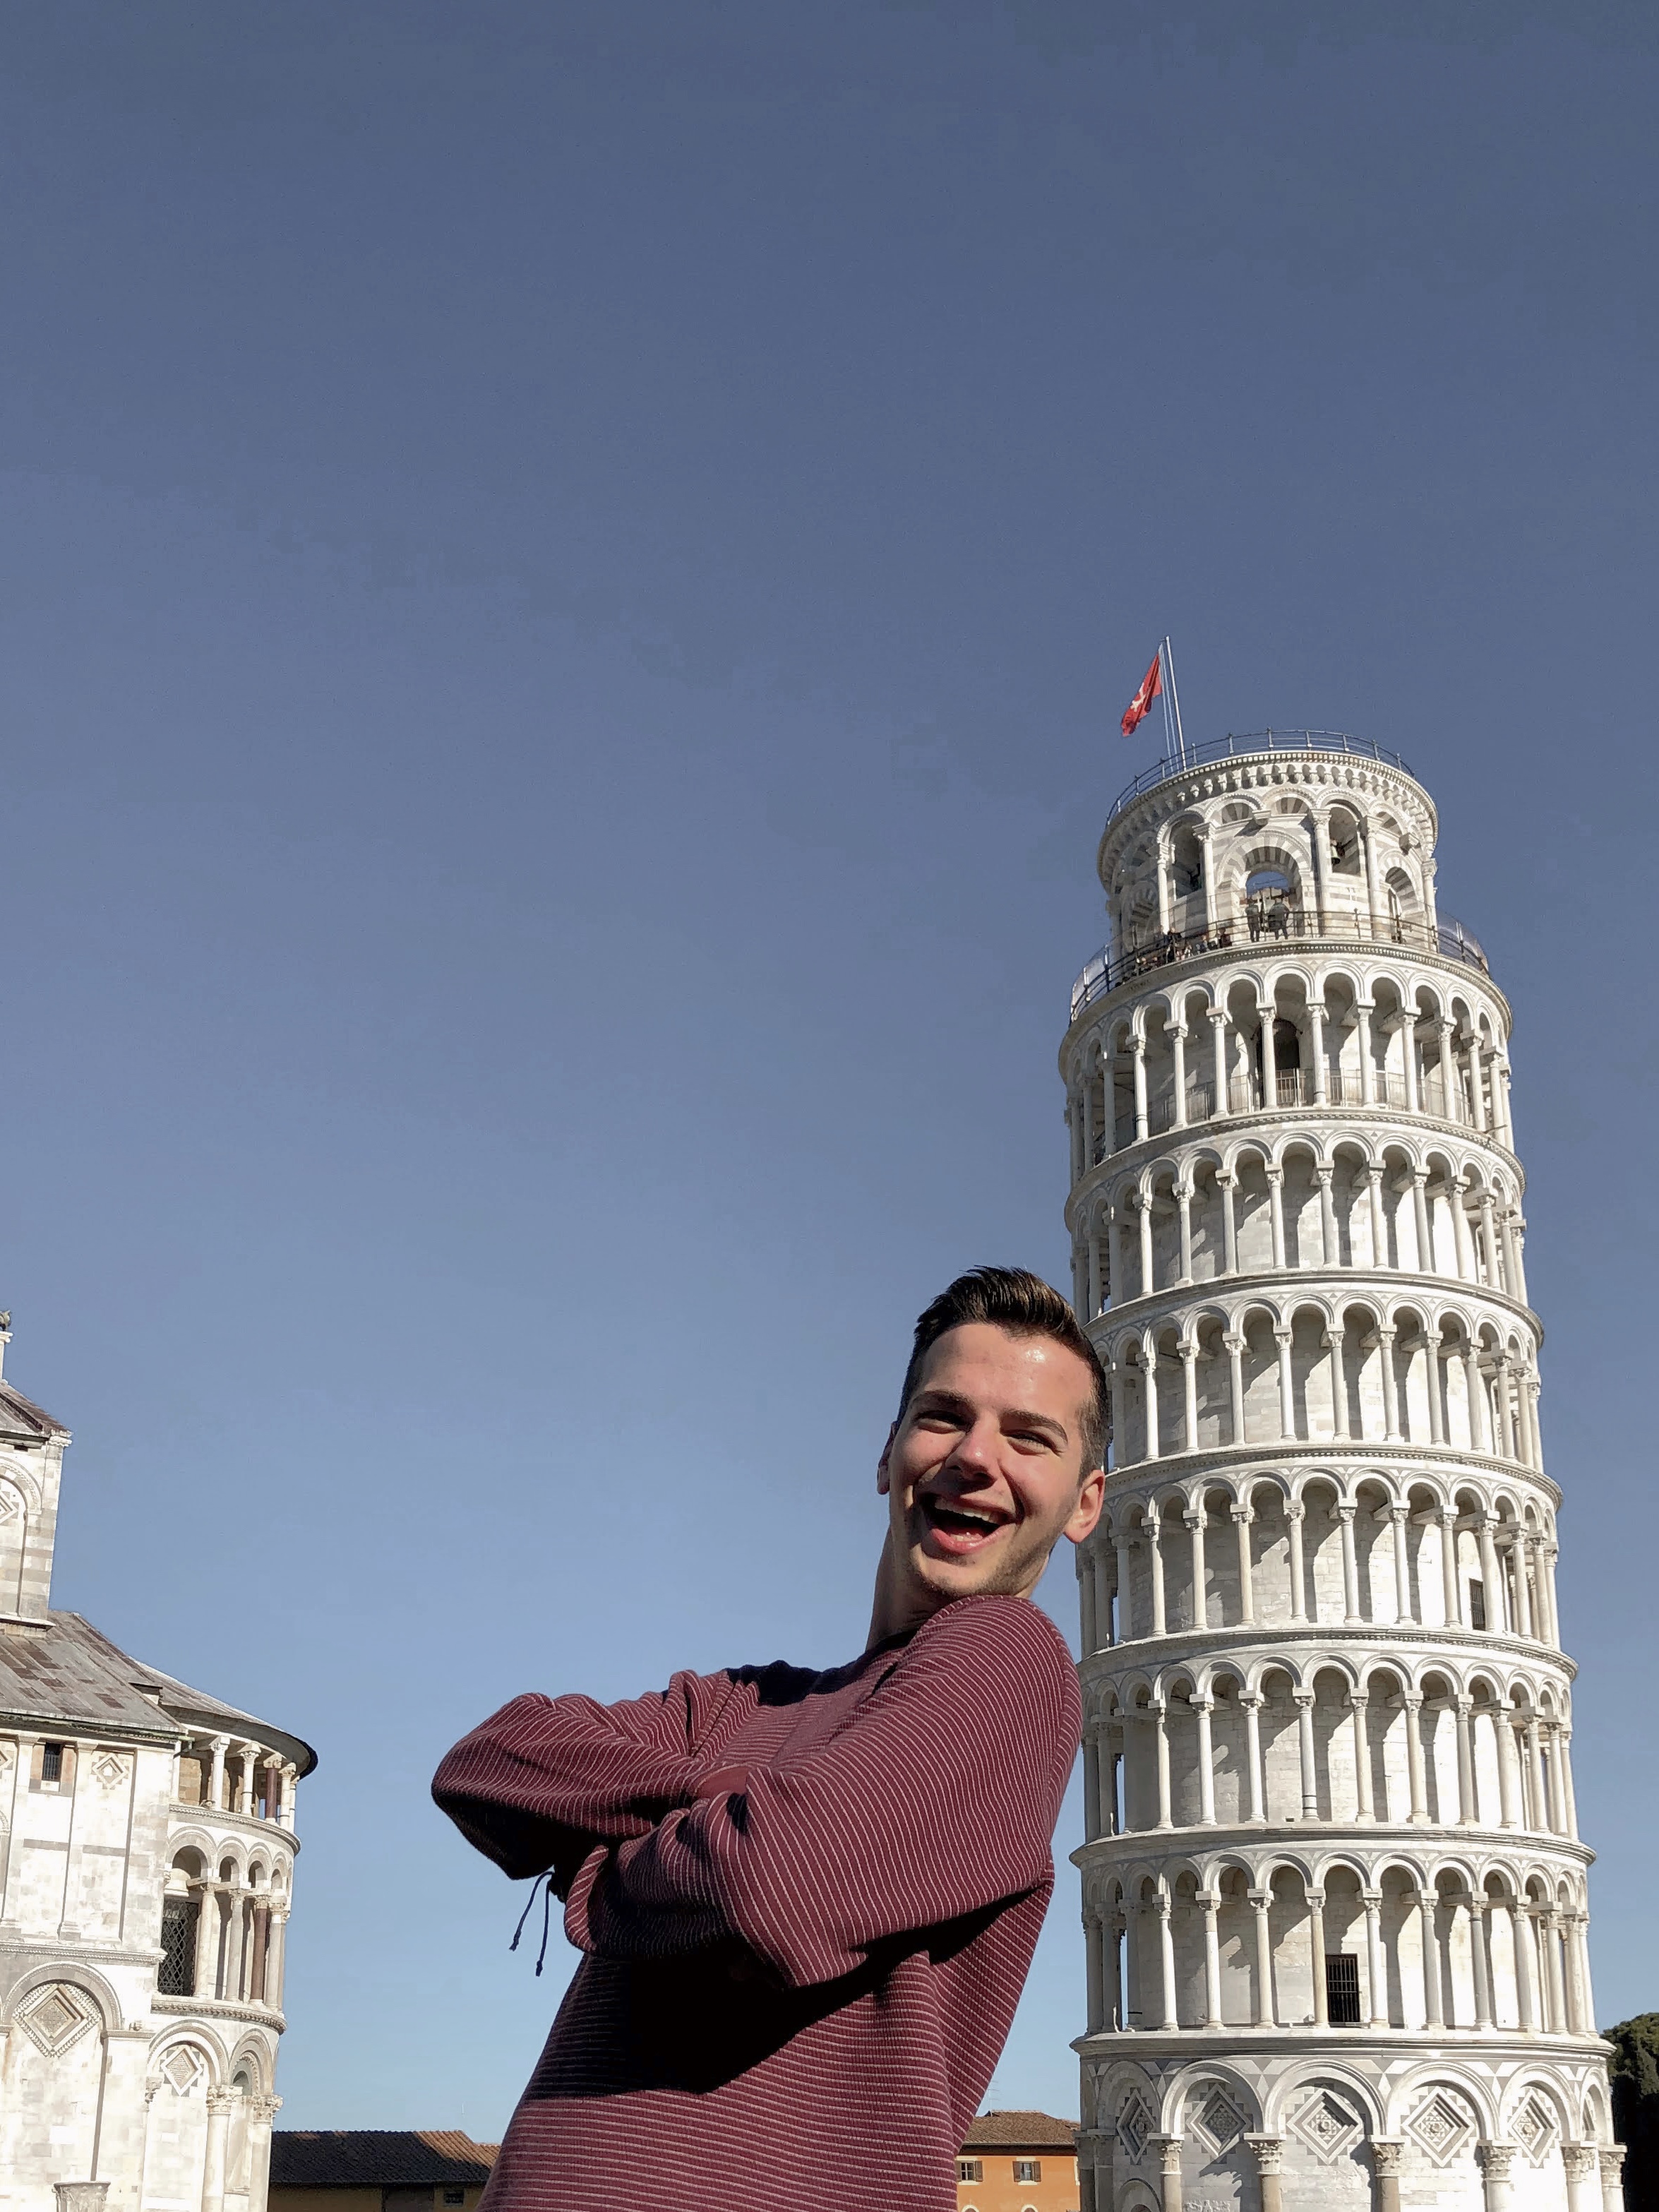 Danny taking the iconic photo next to the Leaning Tower of Pisa.